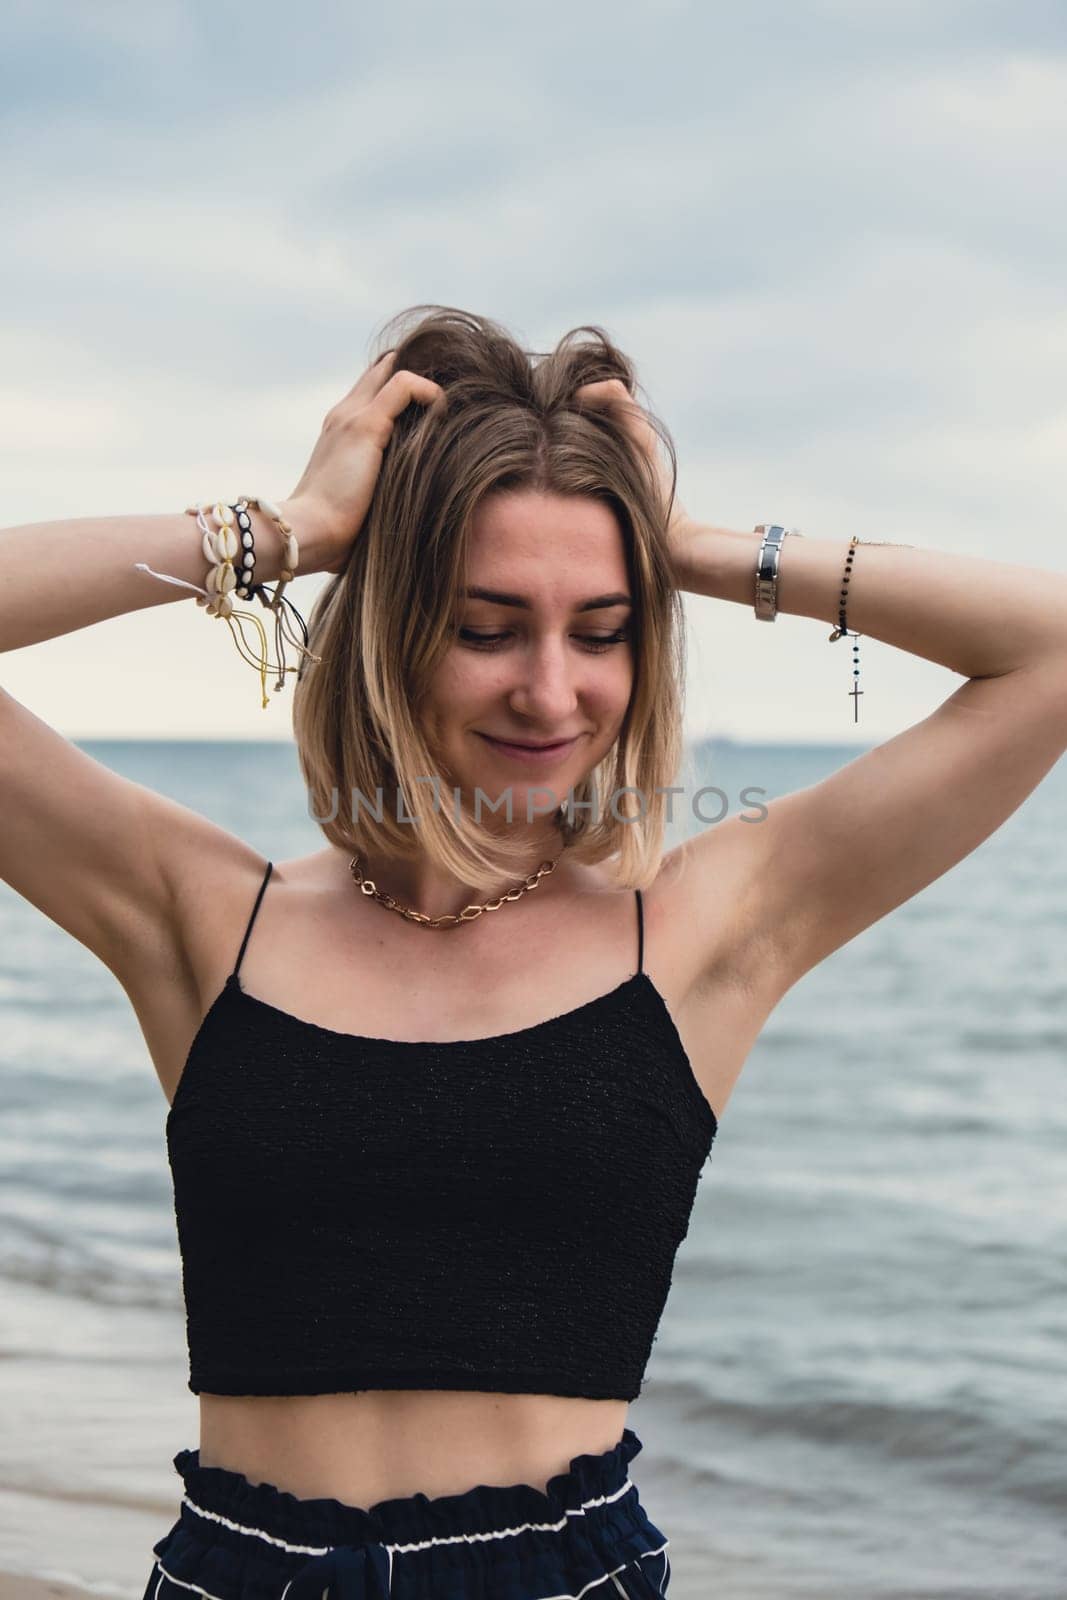 Young woman standing on blurred beachside background. Attractive female enjoying walking the sea shore. travel and active lifestyle concept. Springtime. Relaxation, youth, love, lifestyle solitude with nature. Wellness wellbeing mental health inner peace Slow life digital detox